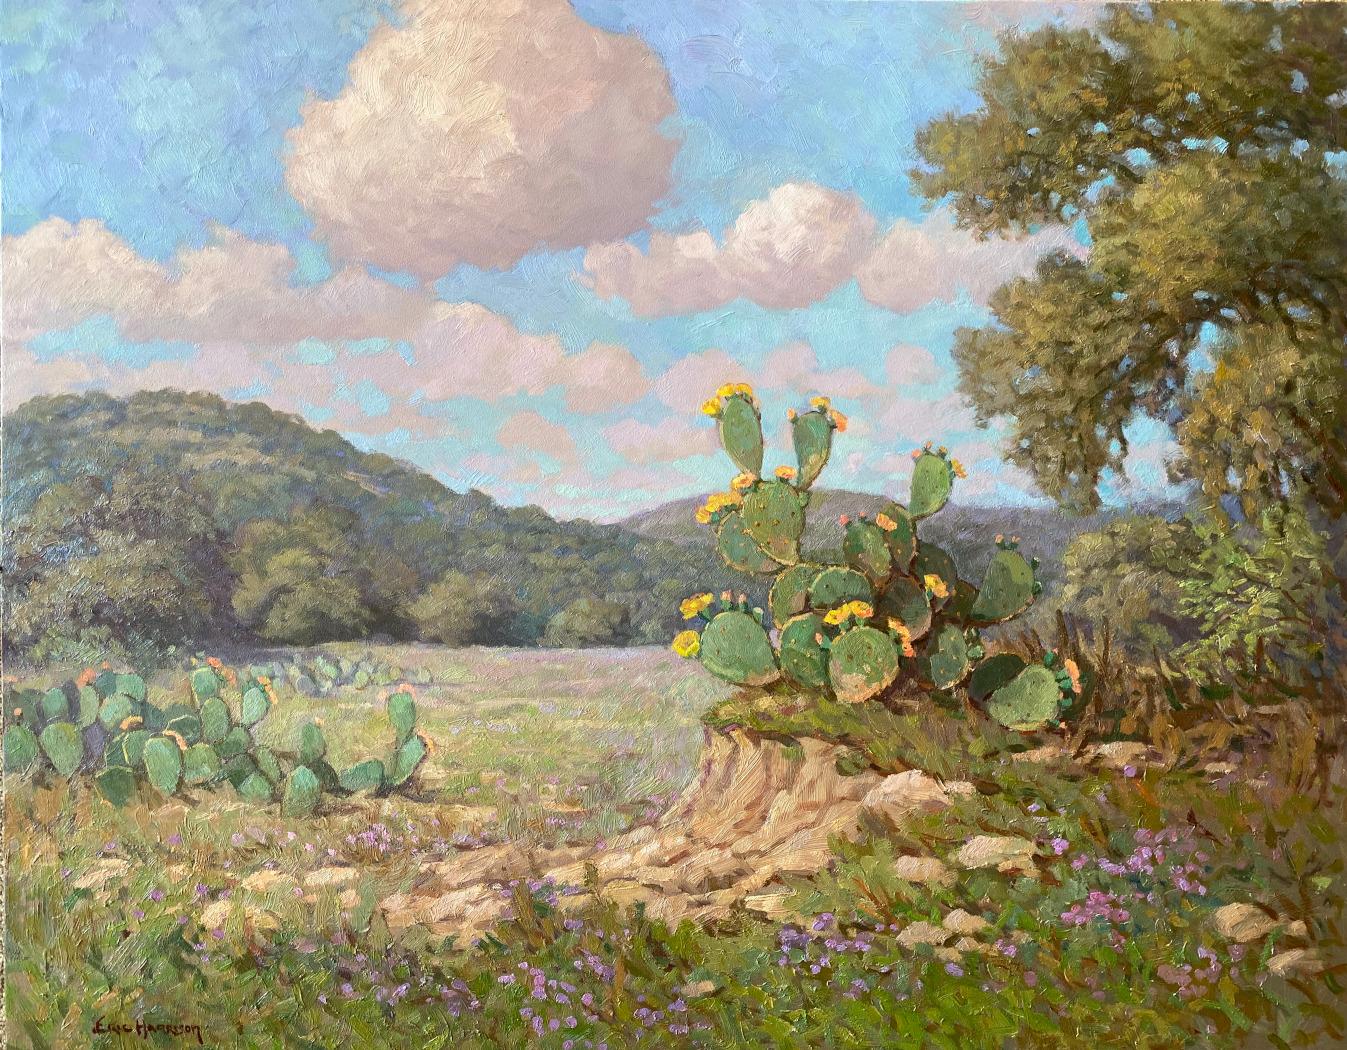 Eric Harrison Landscape Painting - "CACTUS BLOOMS WITH VERBENA" PRICKLY PEAR TEXAS HILL COUNTRY